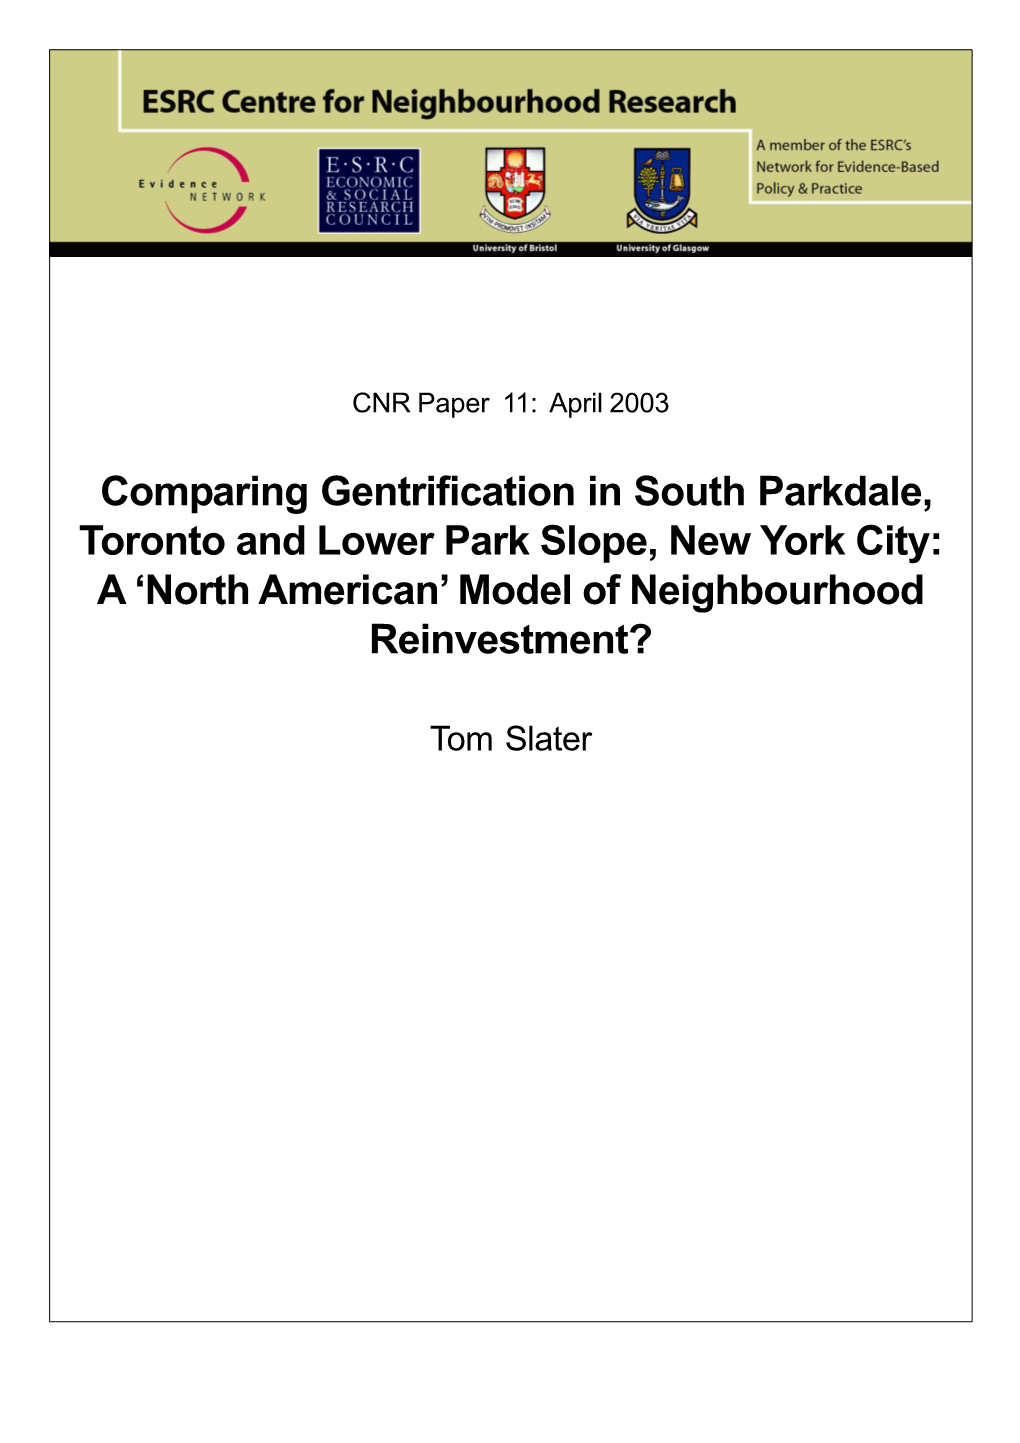 Comparing Gentrification in Parkdale, Toronto and Park Slope, NYC, 2003